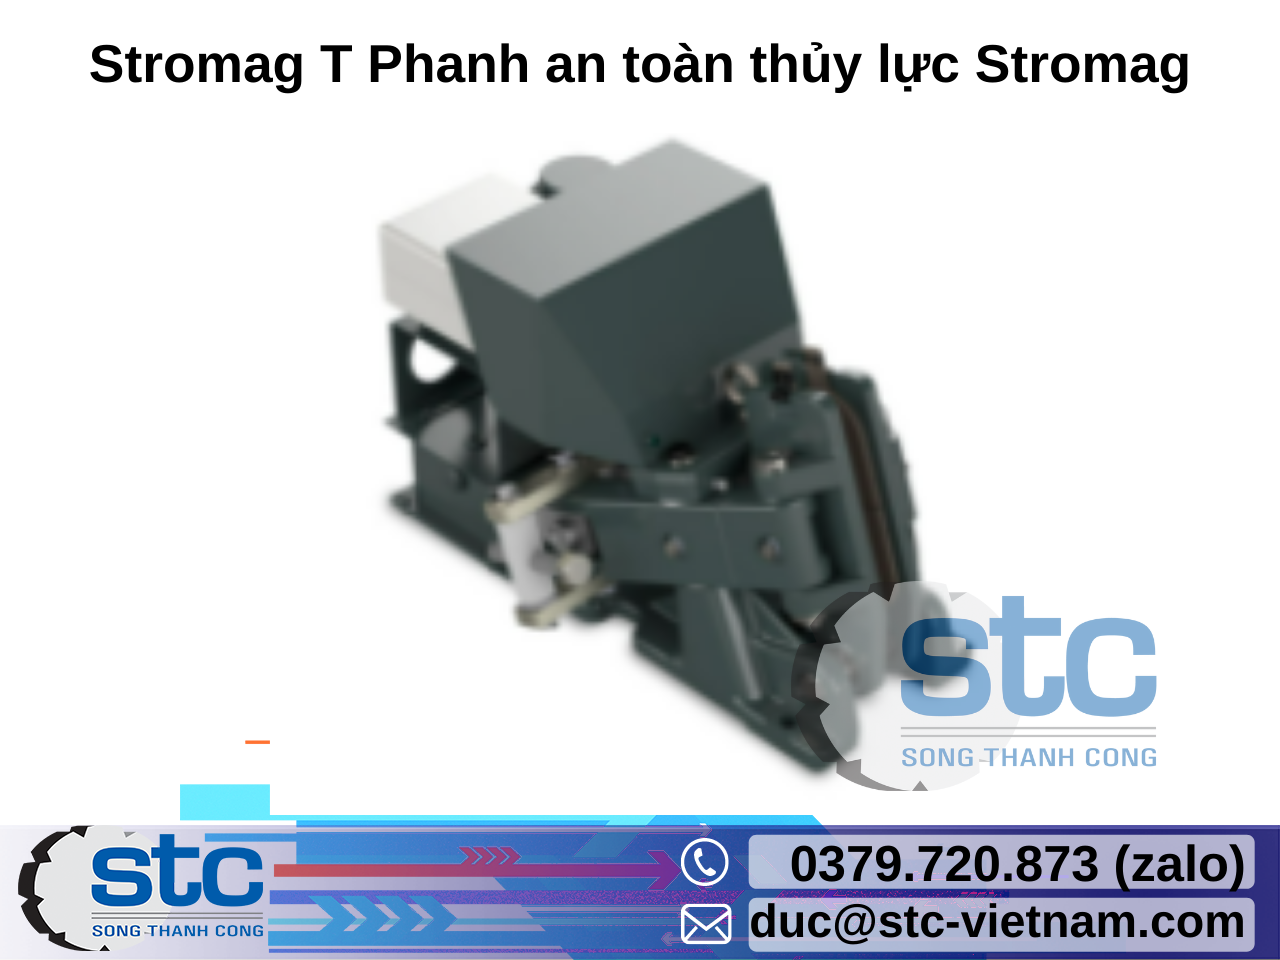 stromag-t-phanh-an-toan-thuy-luc-stromag.png